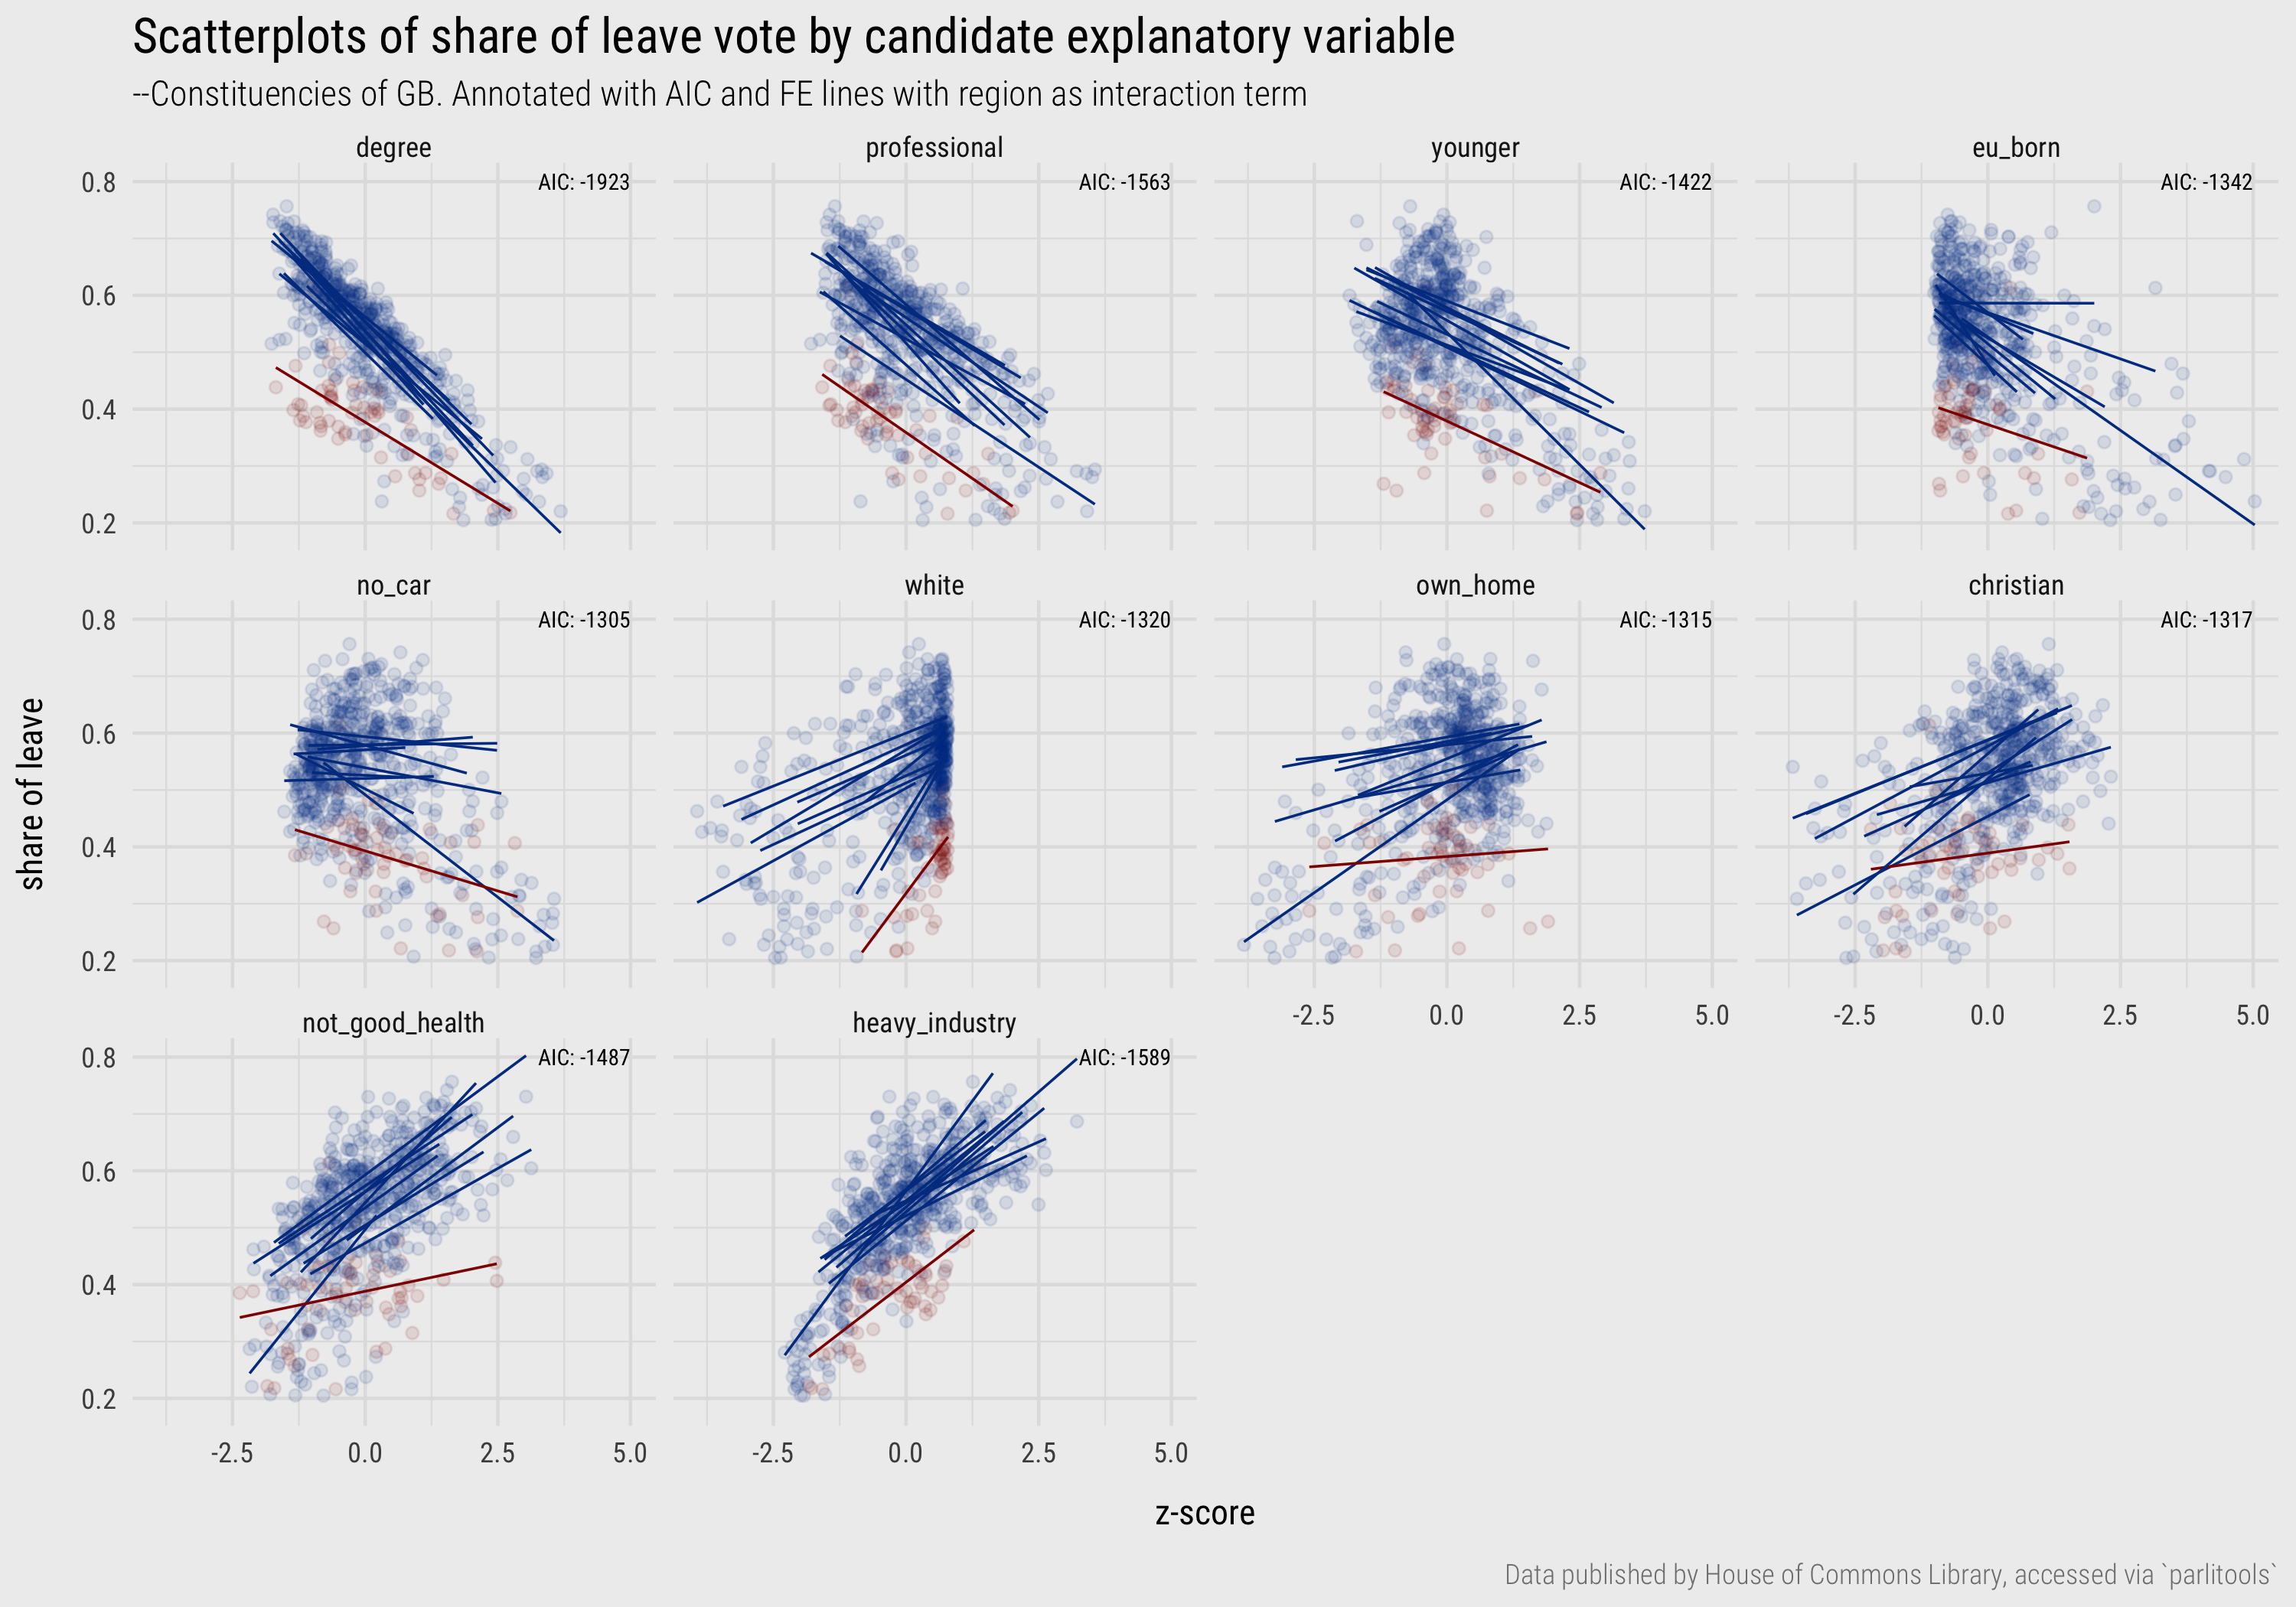 Scatterplots of constituency Leave vote against candidate explanatory variables, annotated with FE regression lines for interaction on region. Scotland is highlighted red.